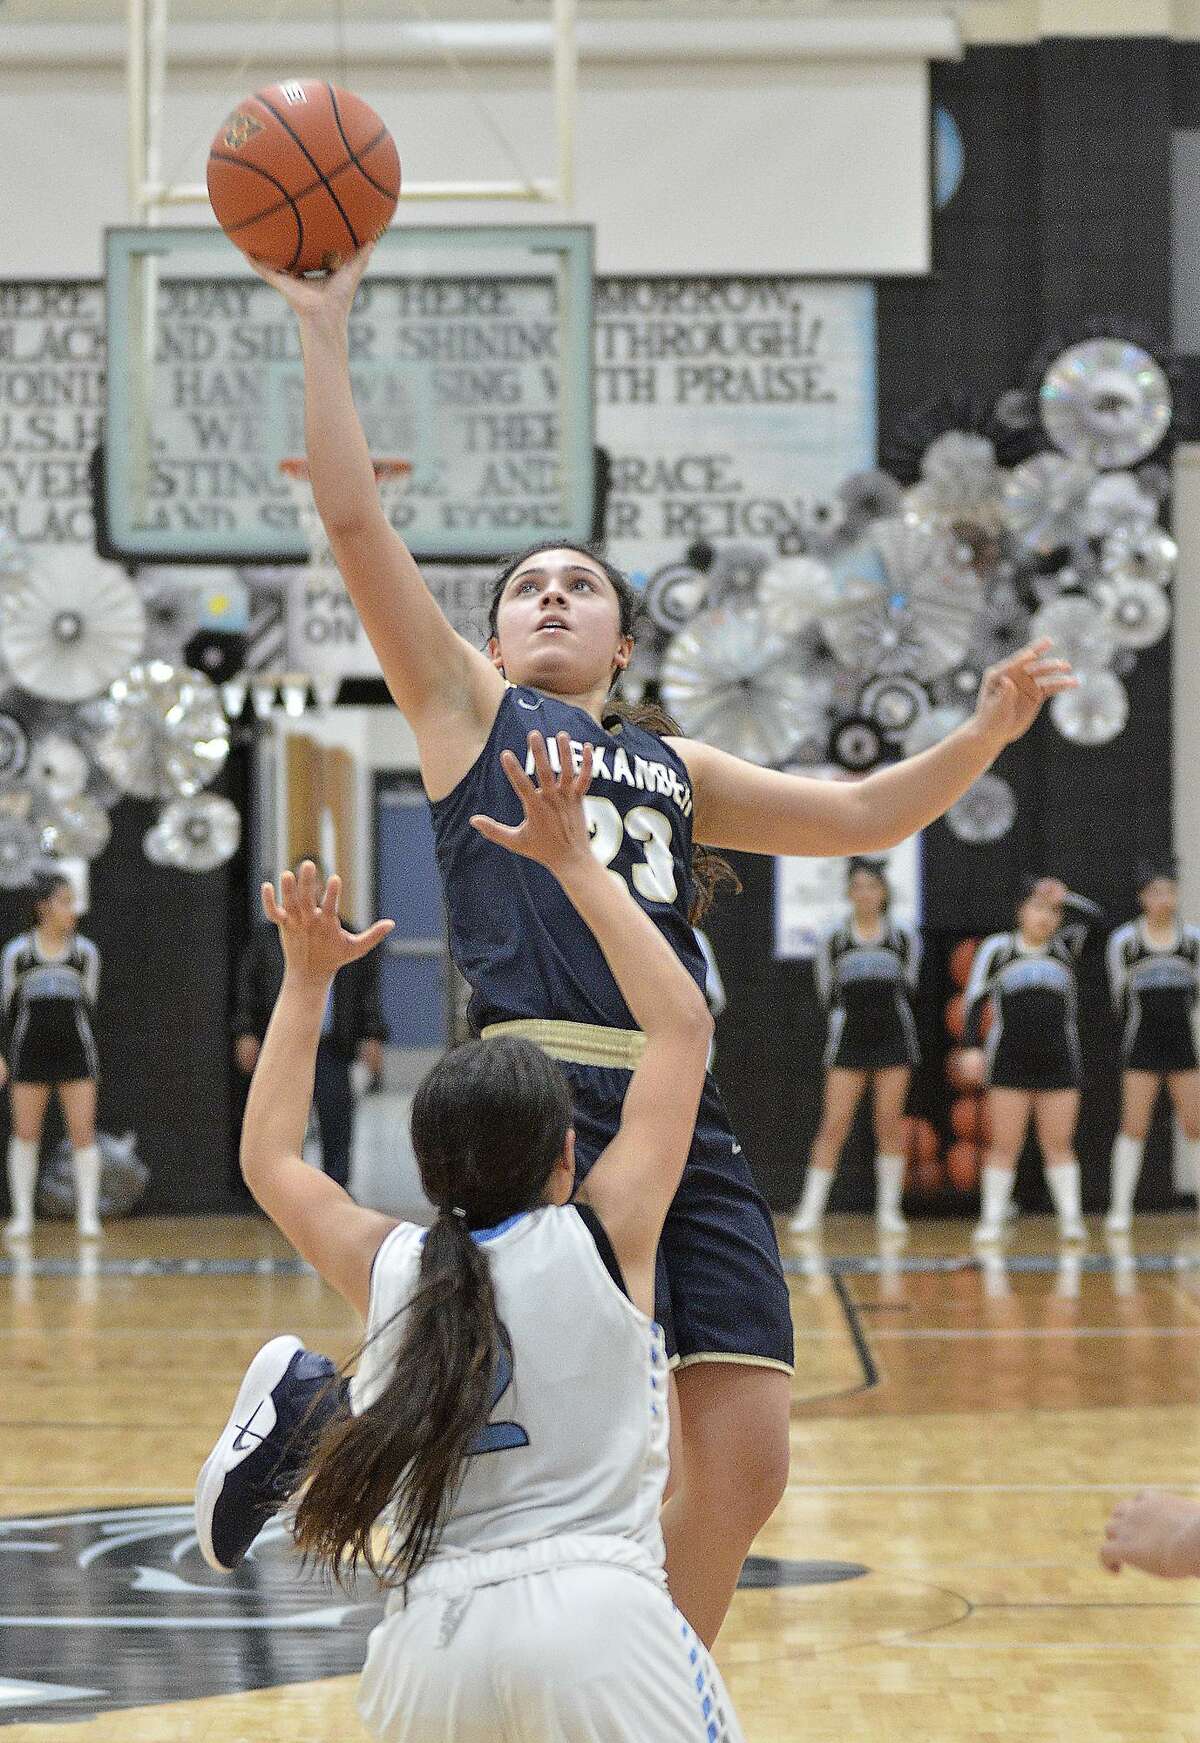 Alyssa Garcia, District 29-6A’s leading scorer at 27 points per game, was held to 16 by United South on Tuesday.